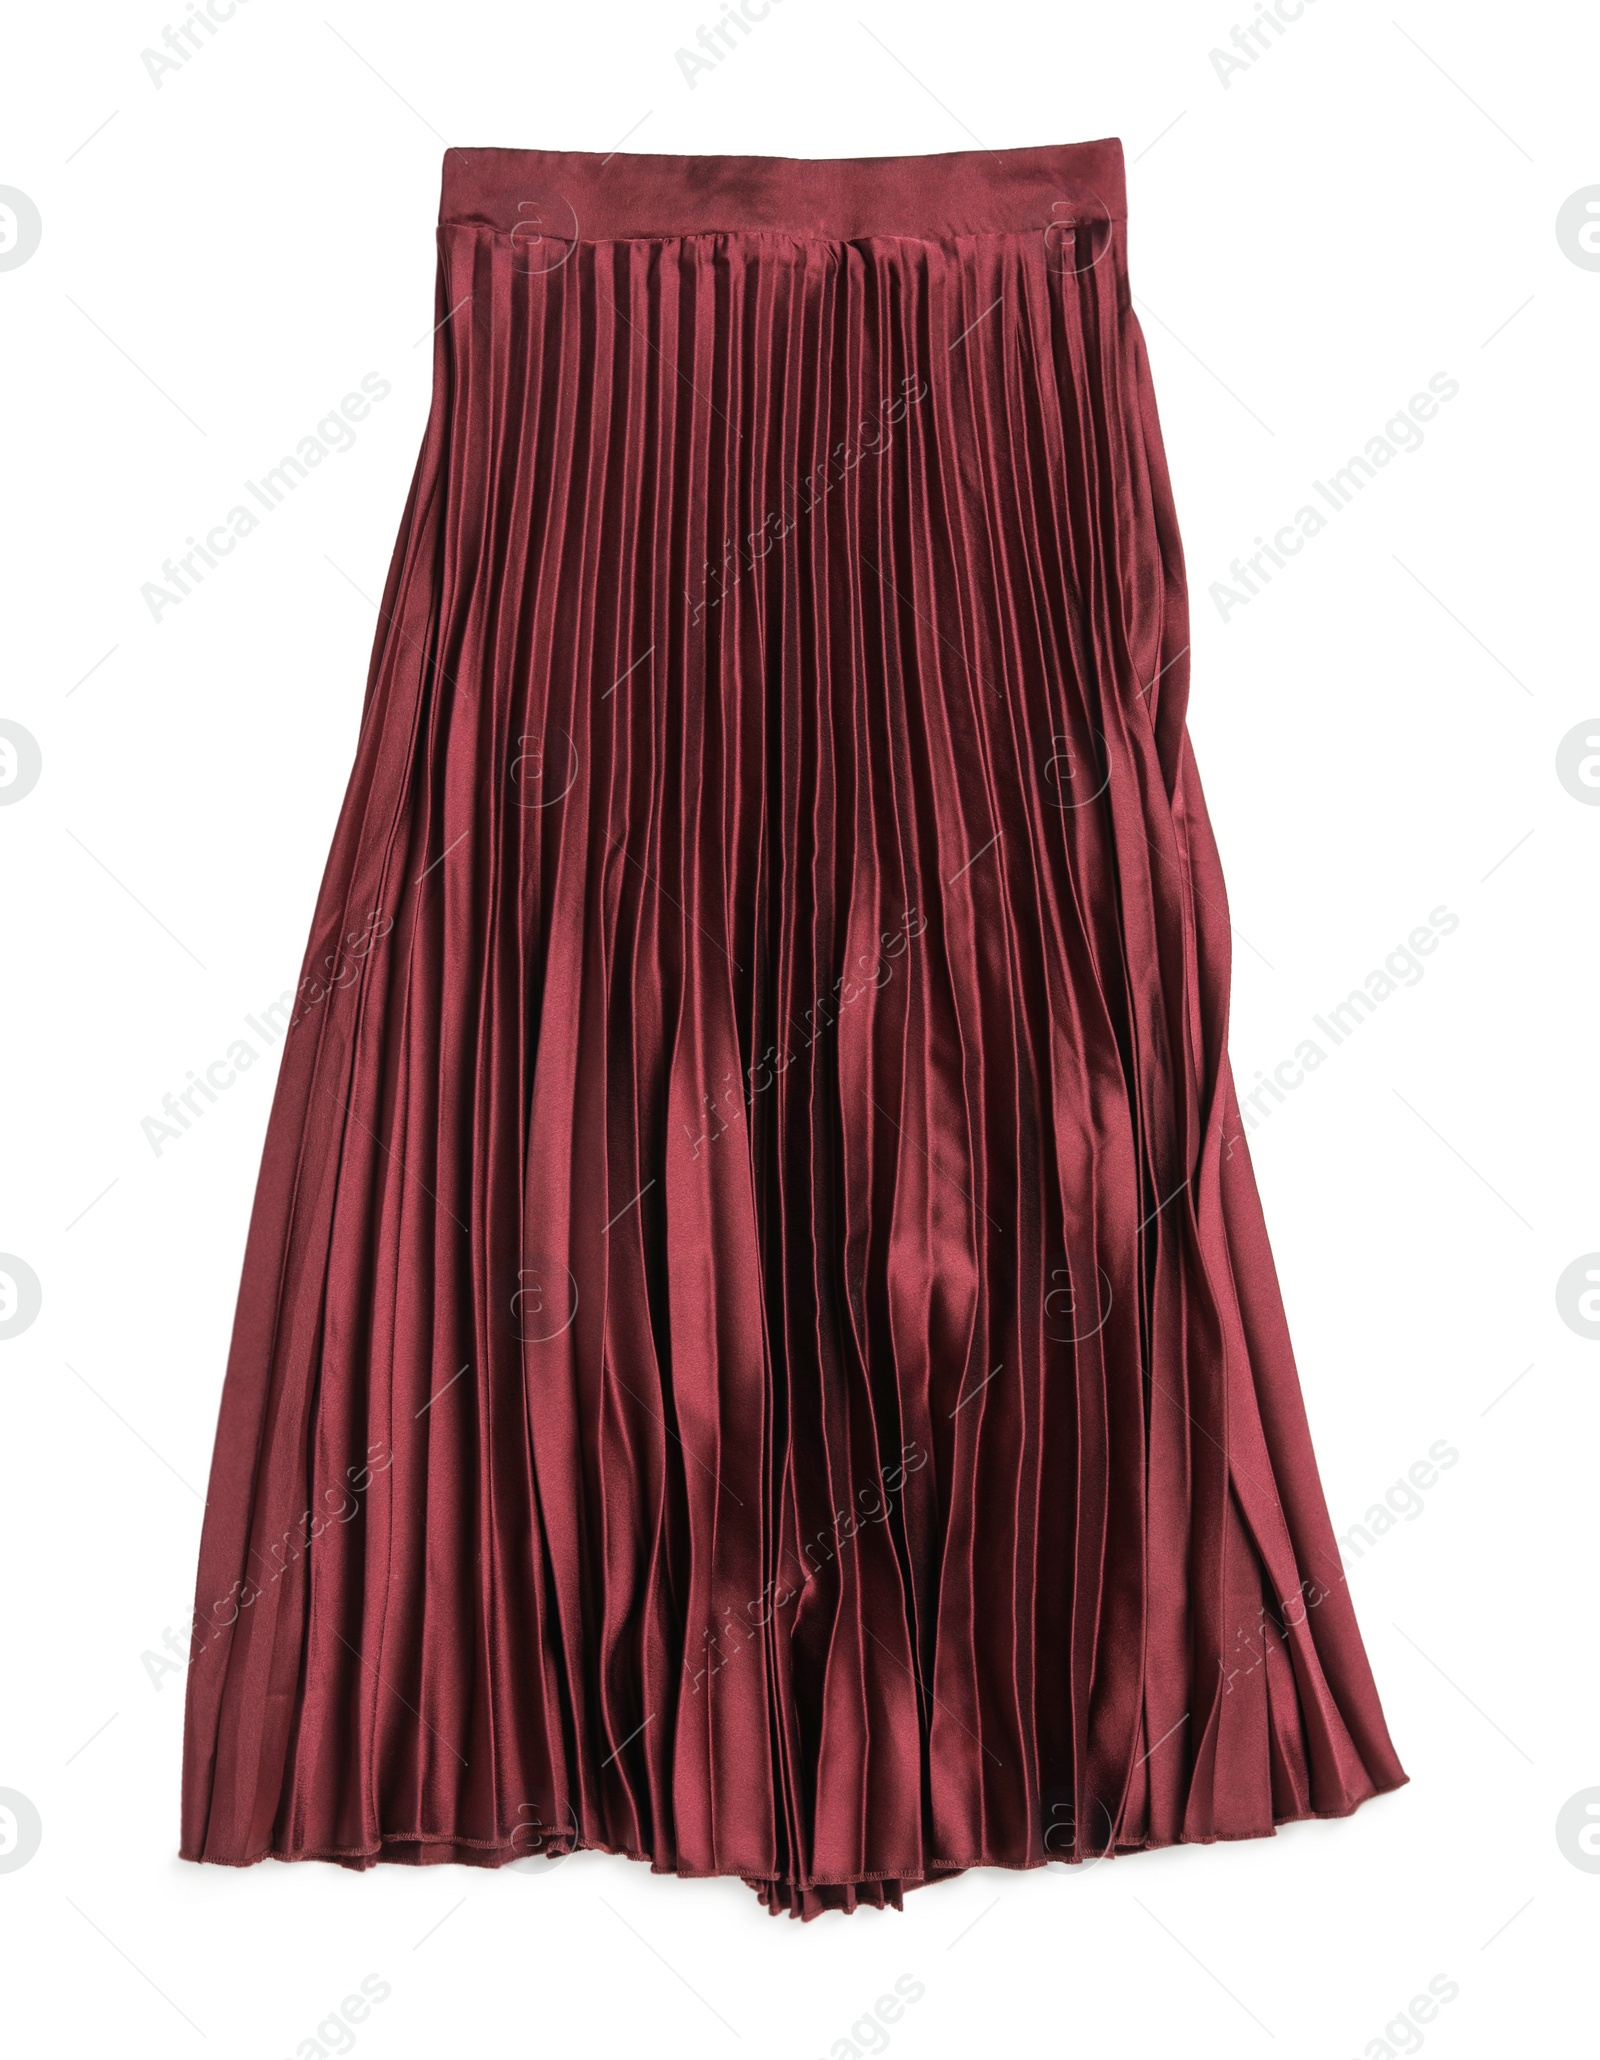 Photo of Elegant long pleated skirt isolated on white, top view